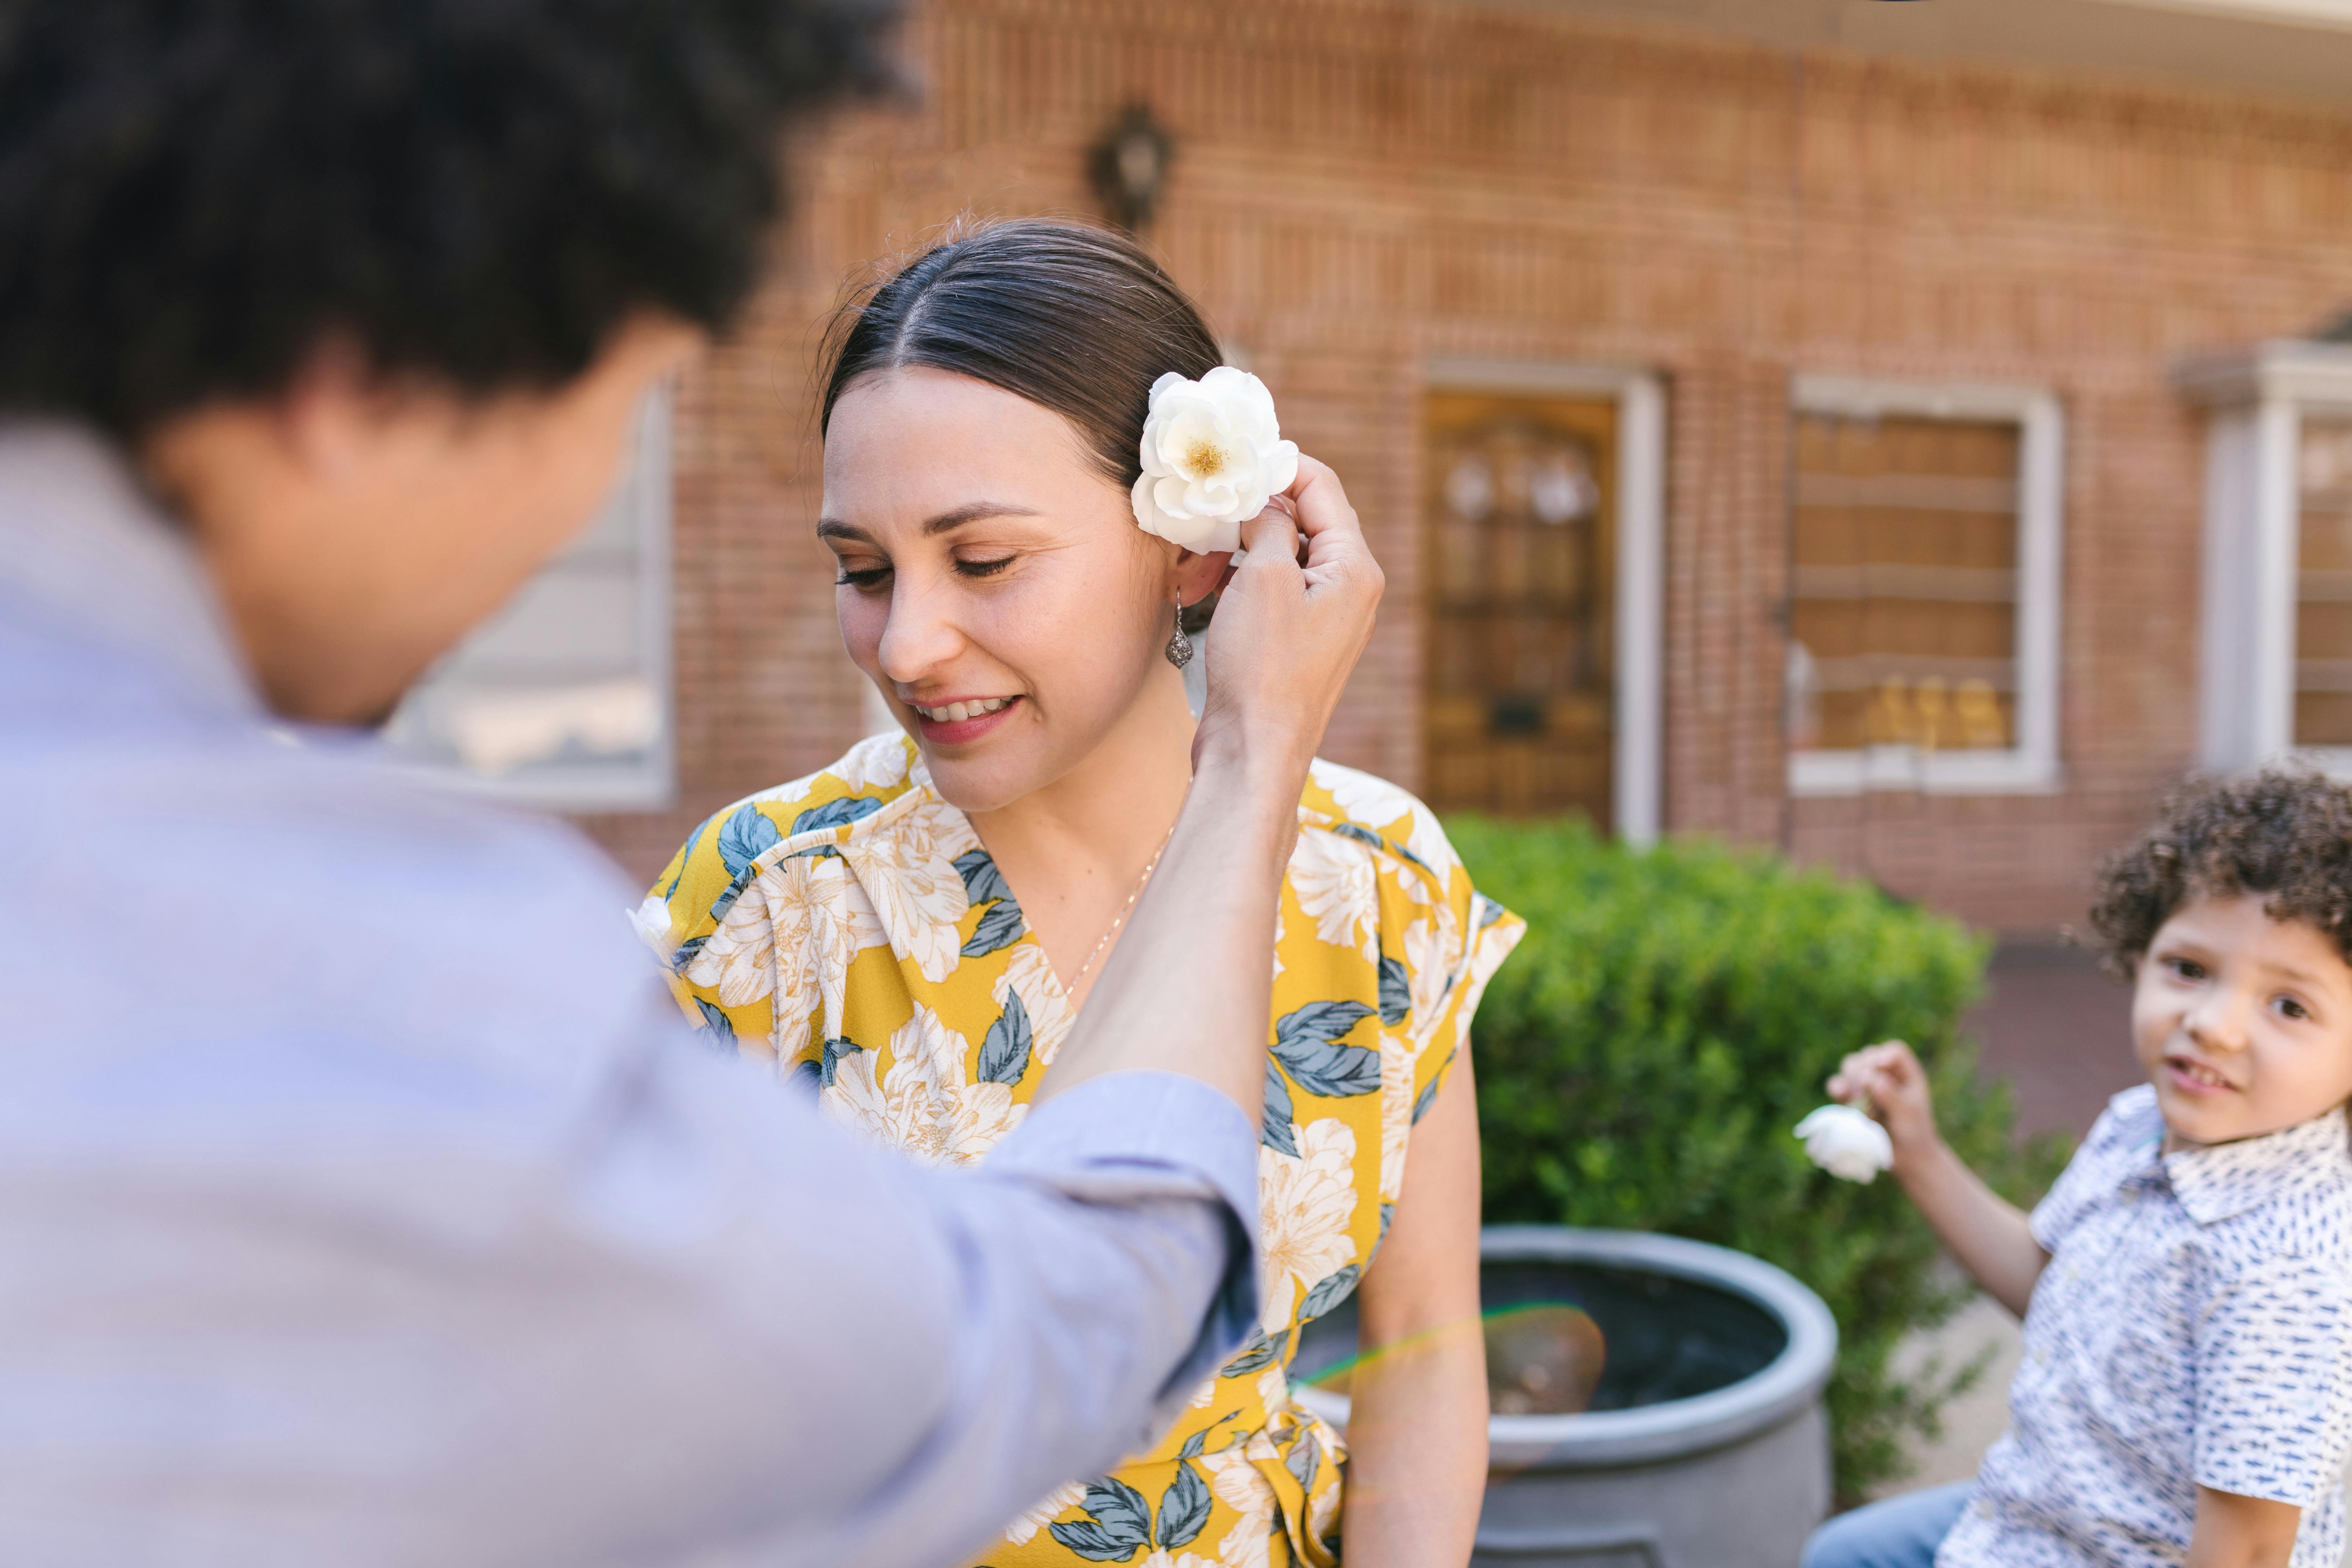 a person putting white flower on woman s ear